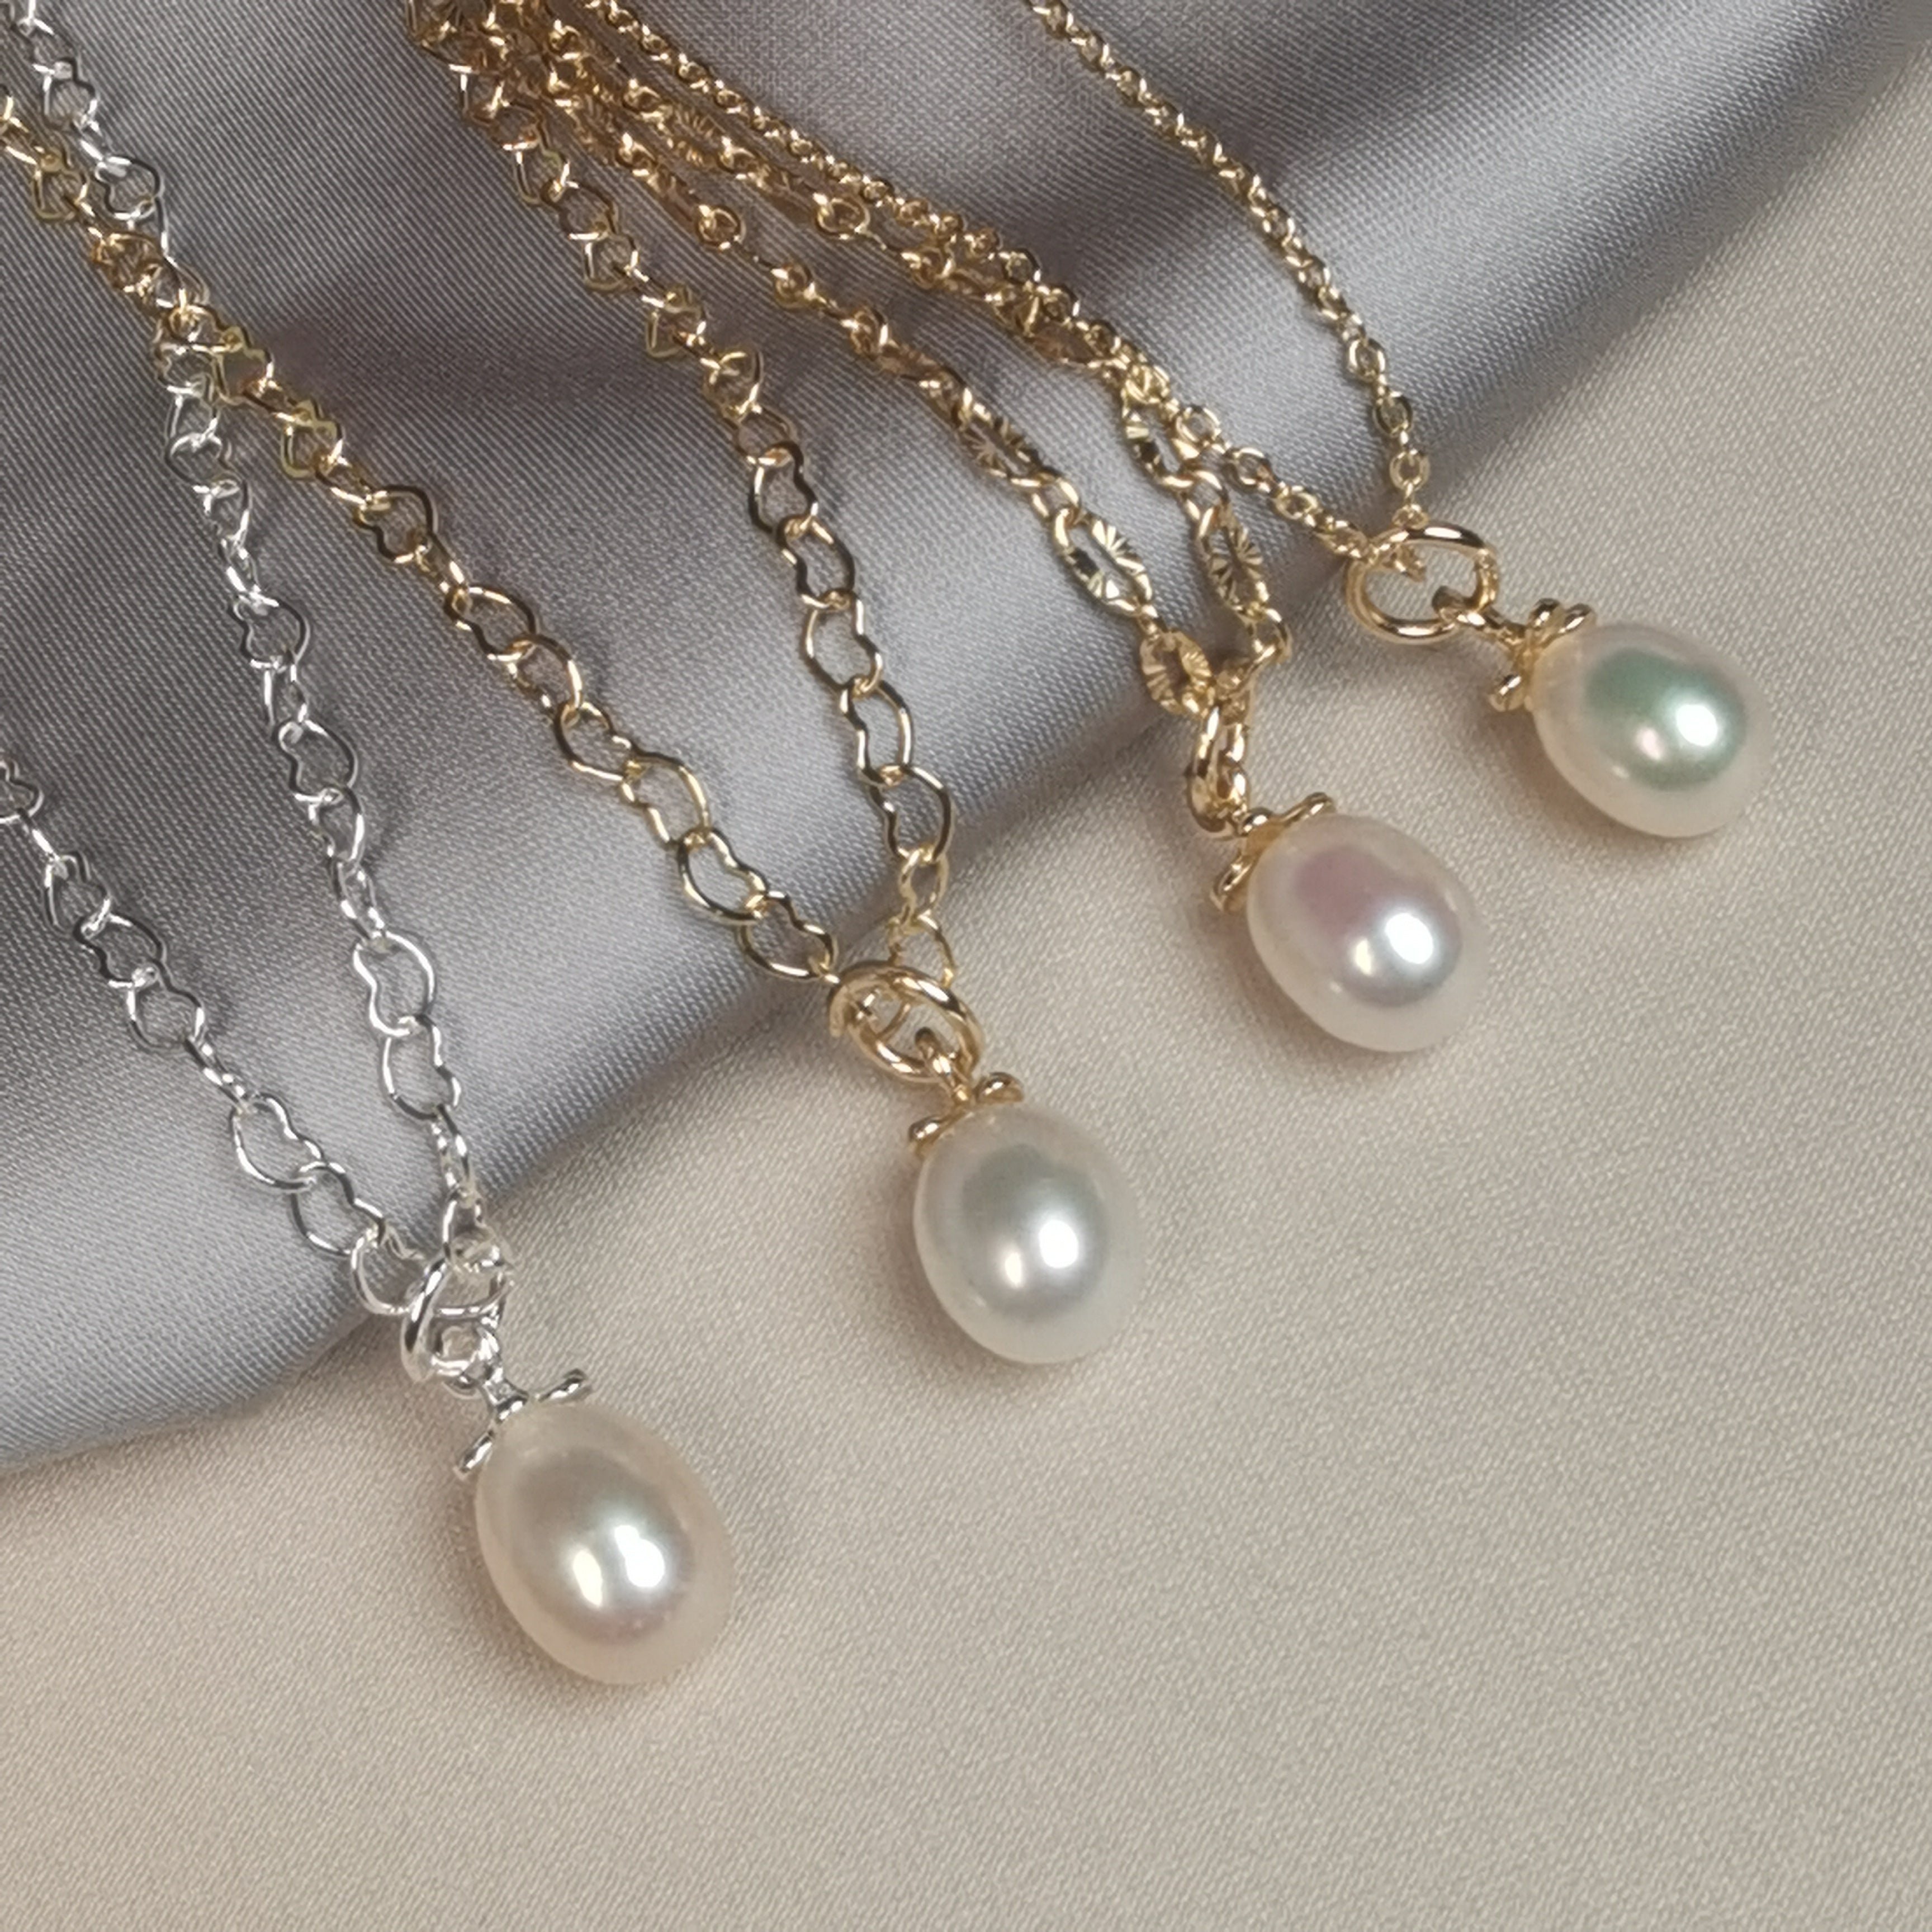 Shop Single Pearl Necklaces and Unique Fine Jewelry Collections at Shane Co.